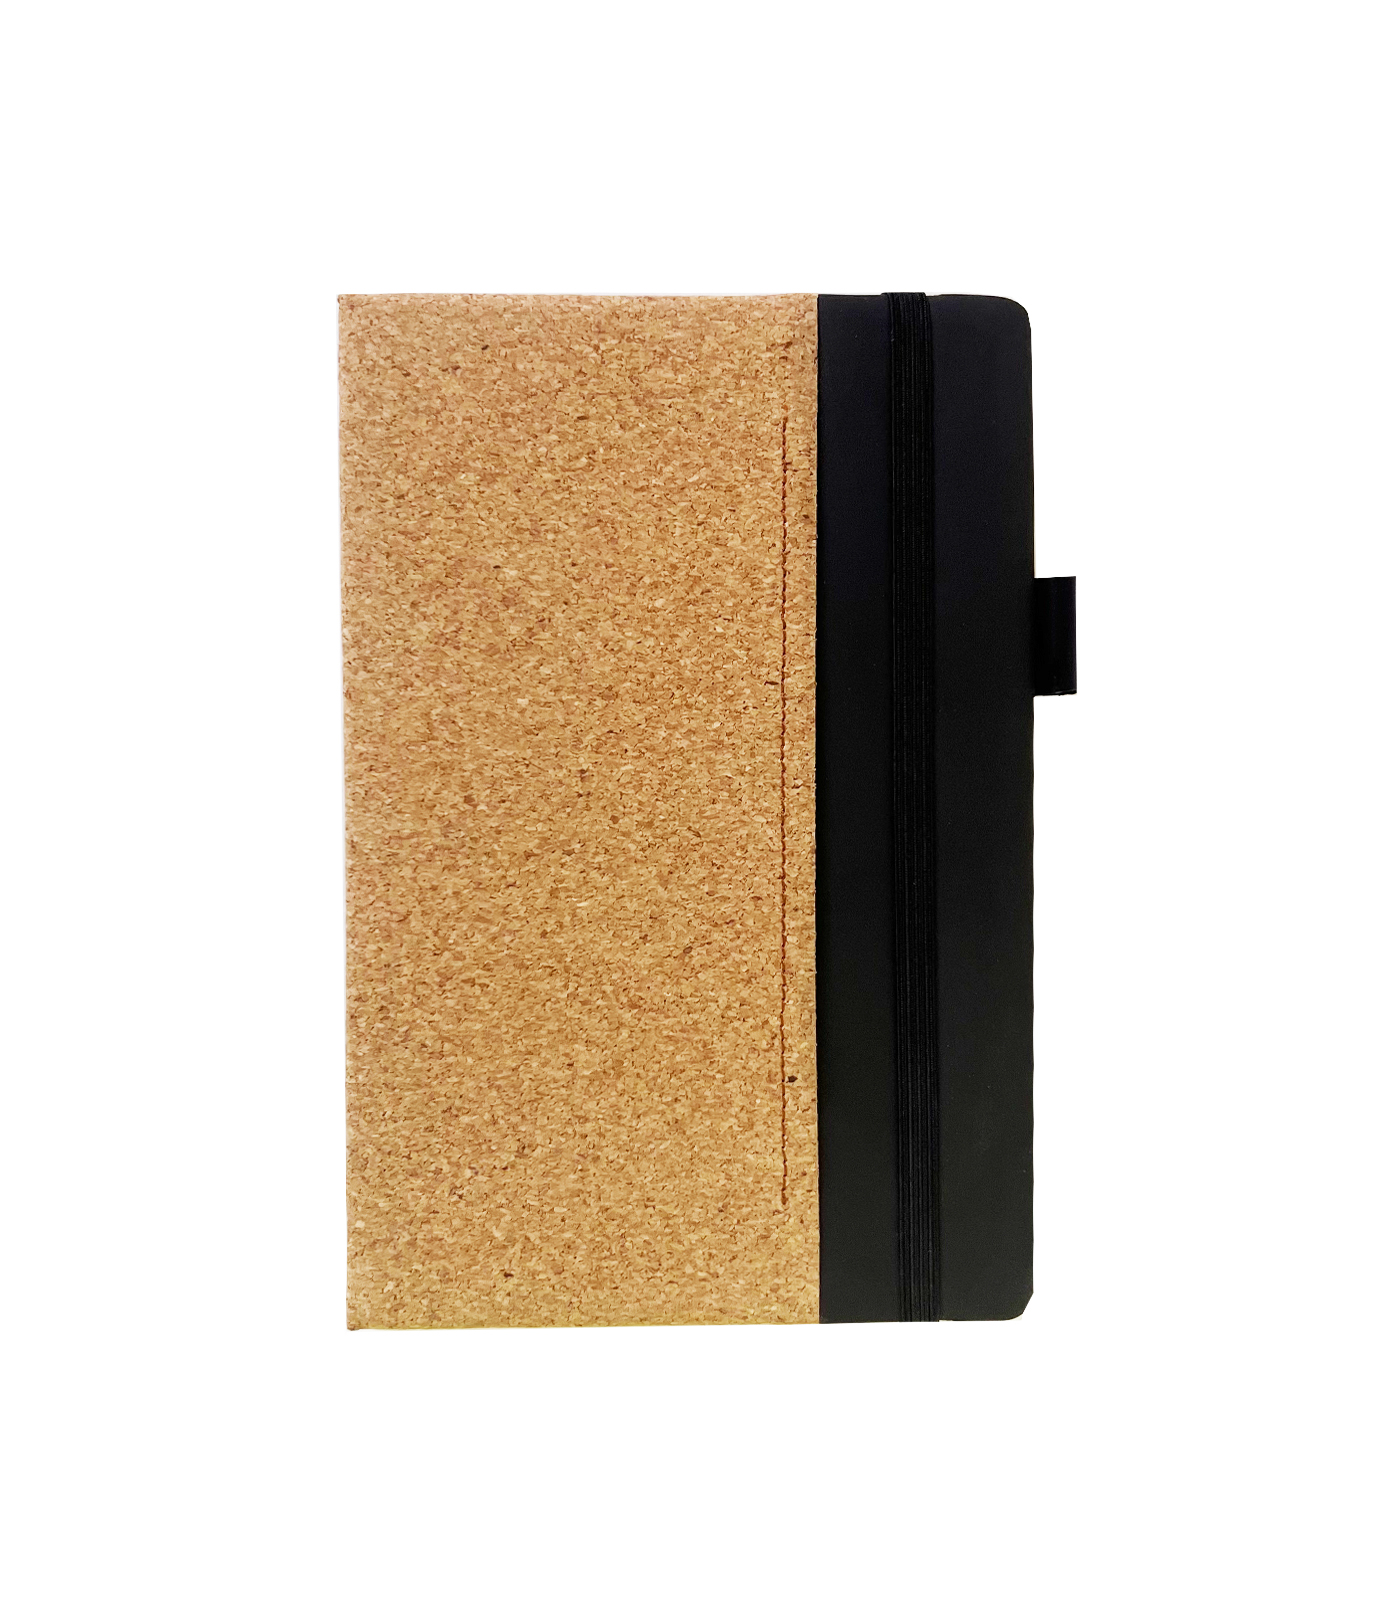 Atom Notebook Leather Cover - Black CRNB21